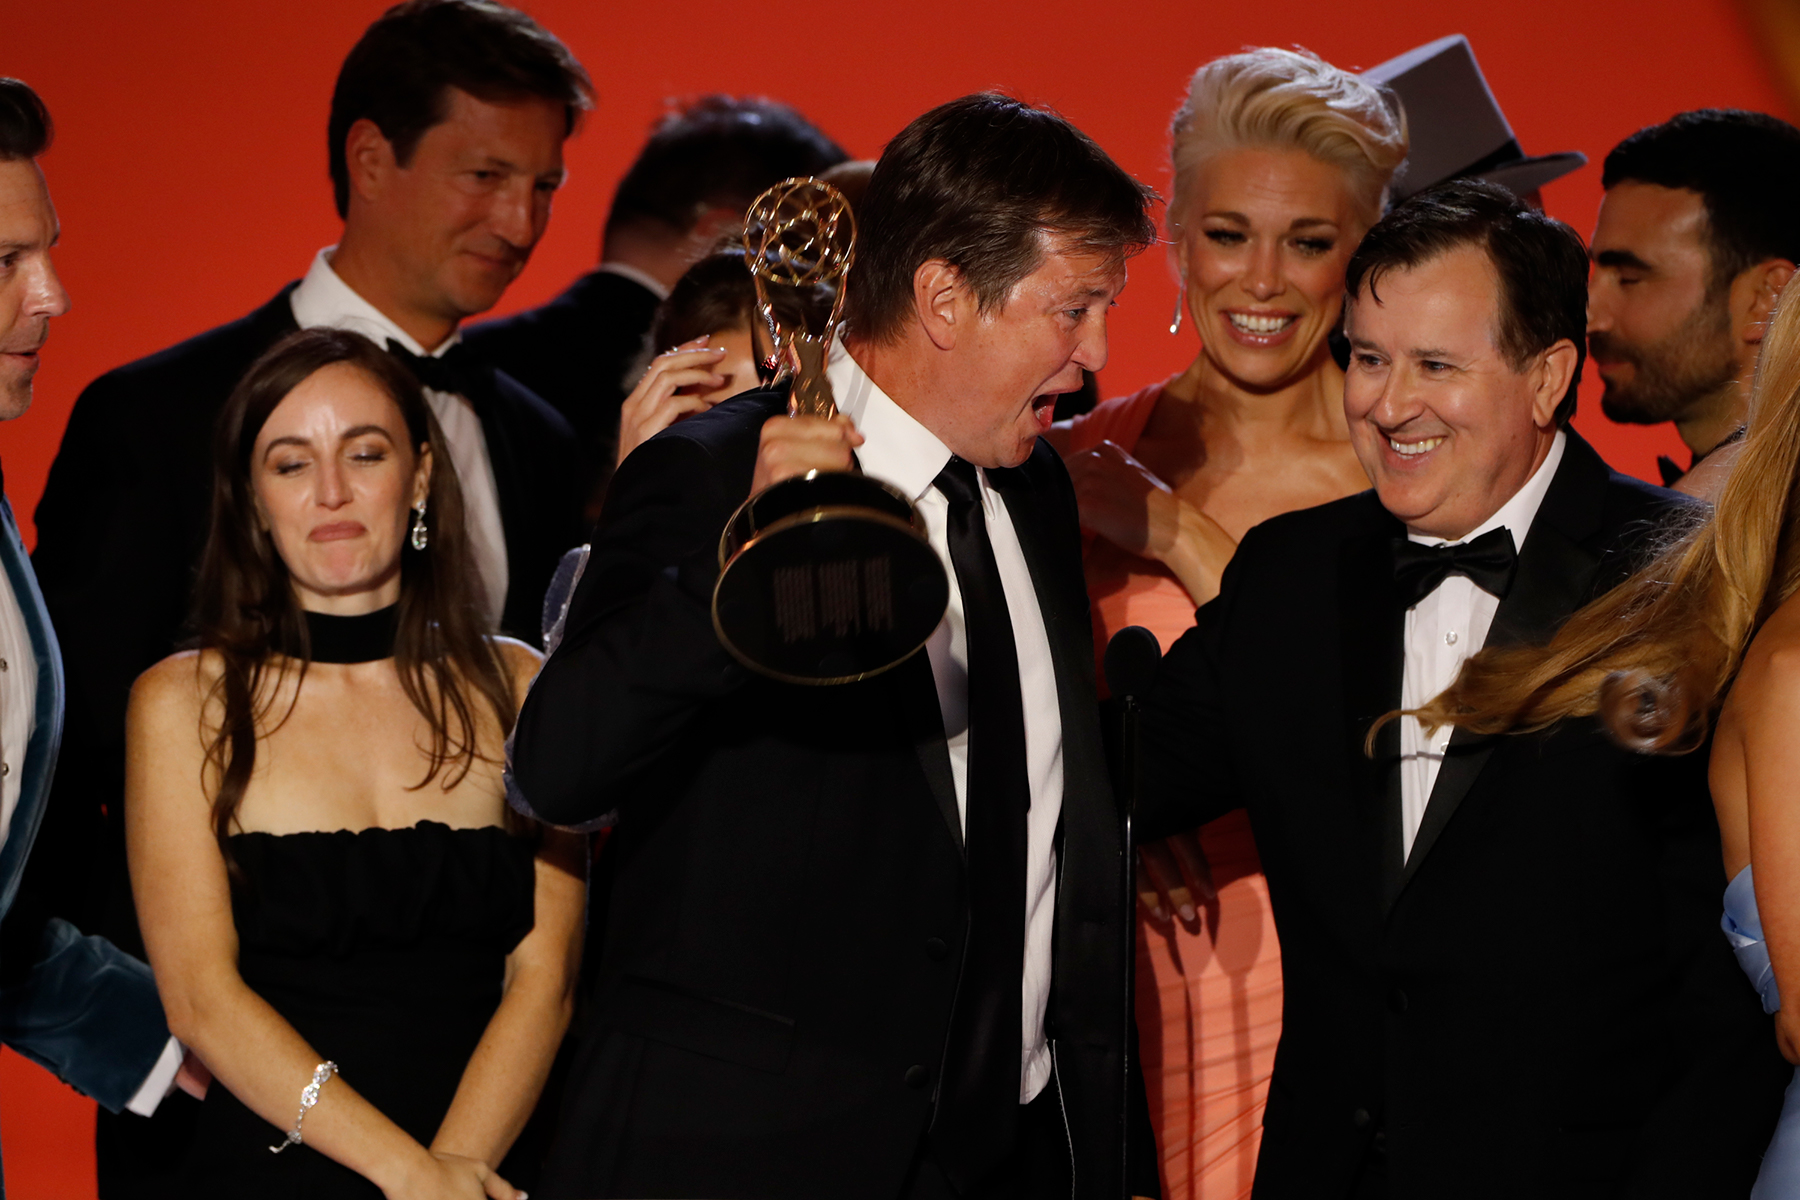 Emmys 2021: 10 Best, Worst, and Most WTF Moments